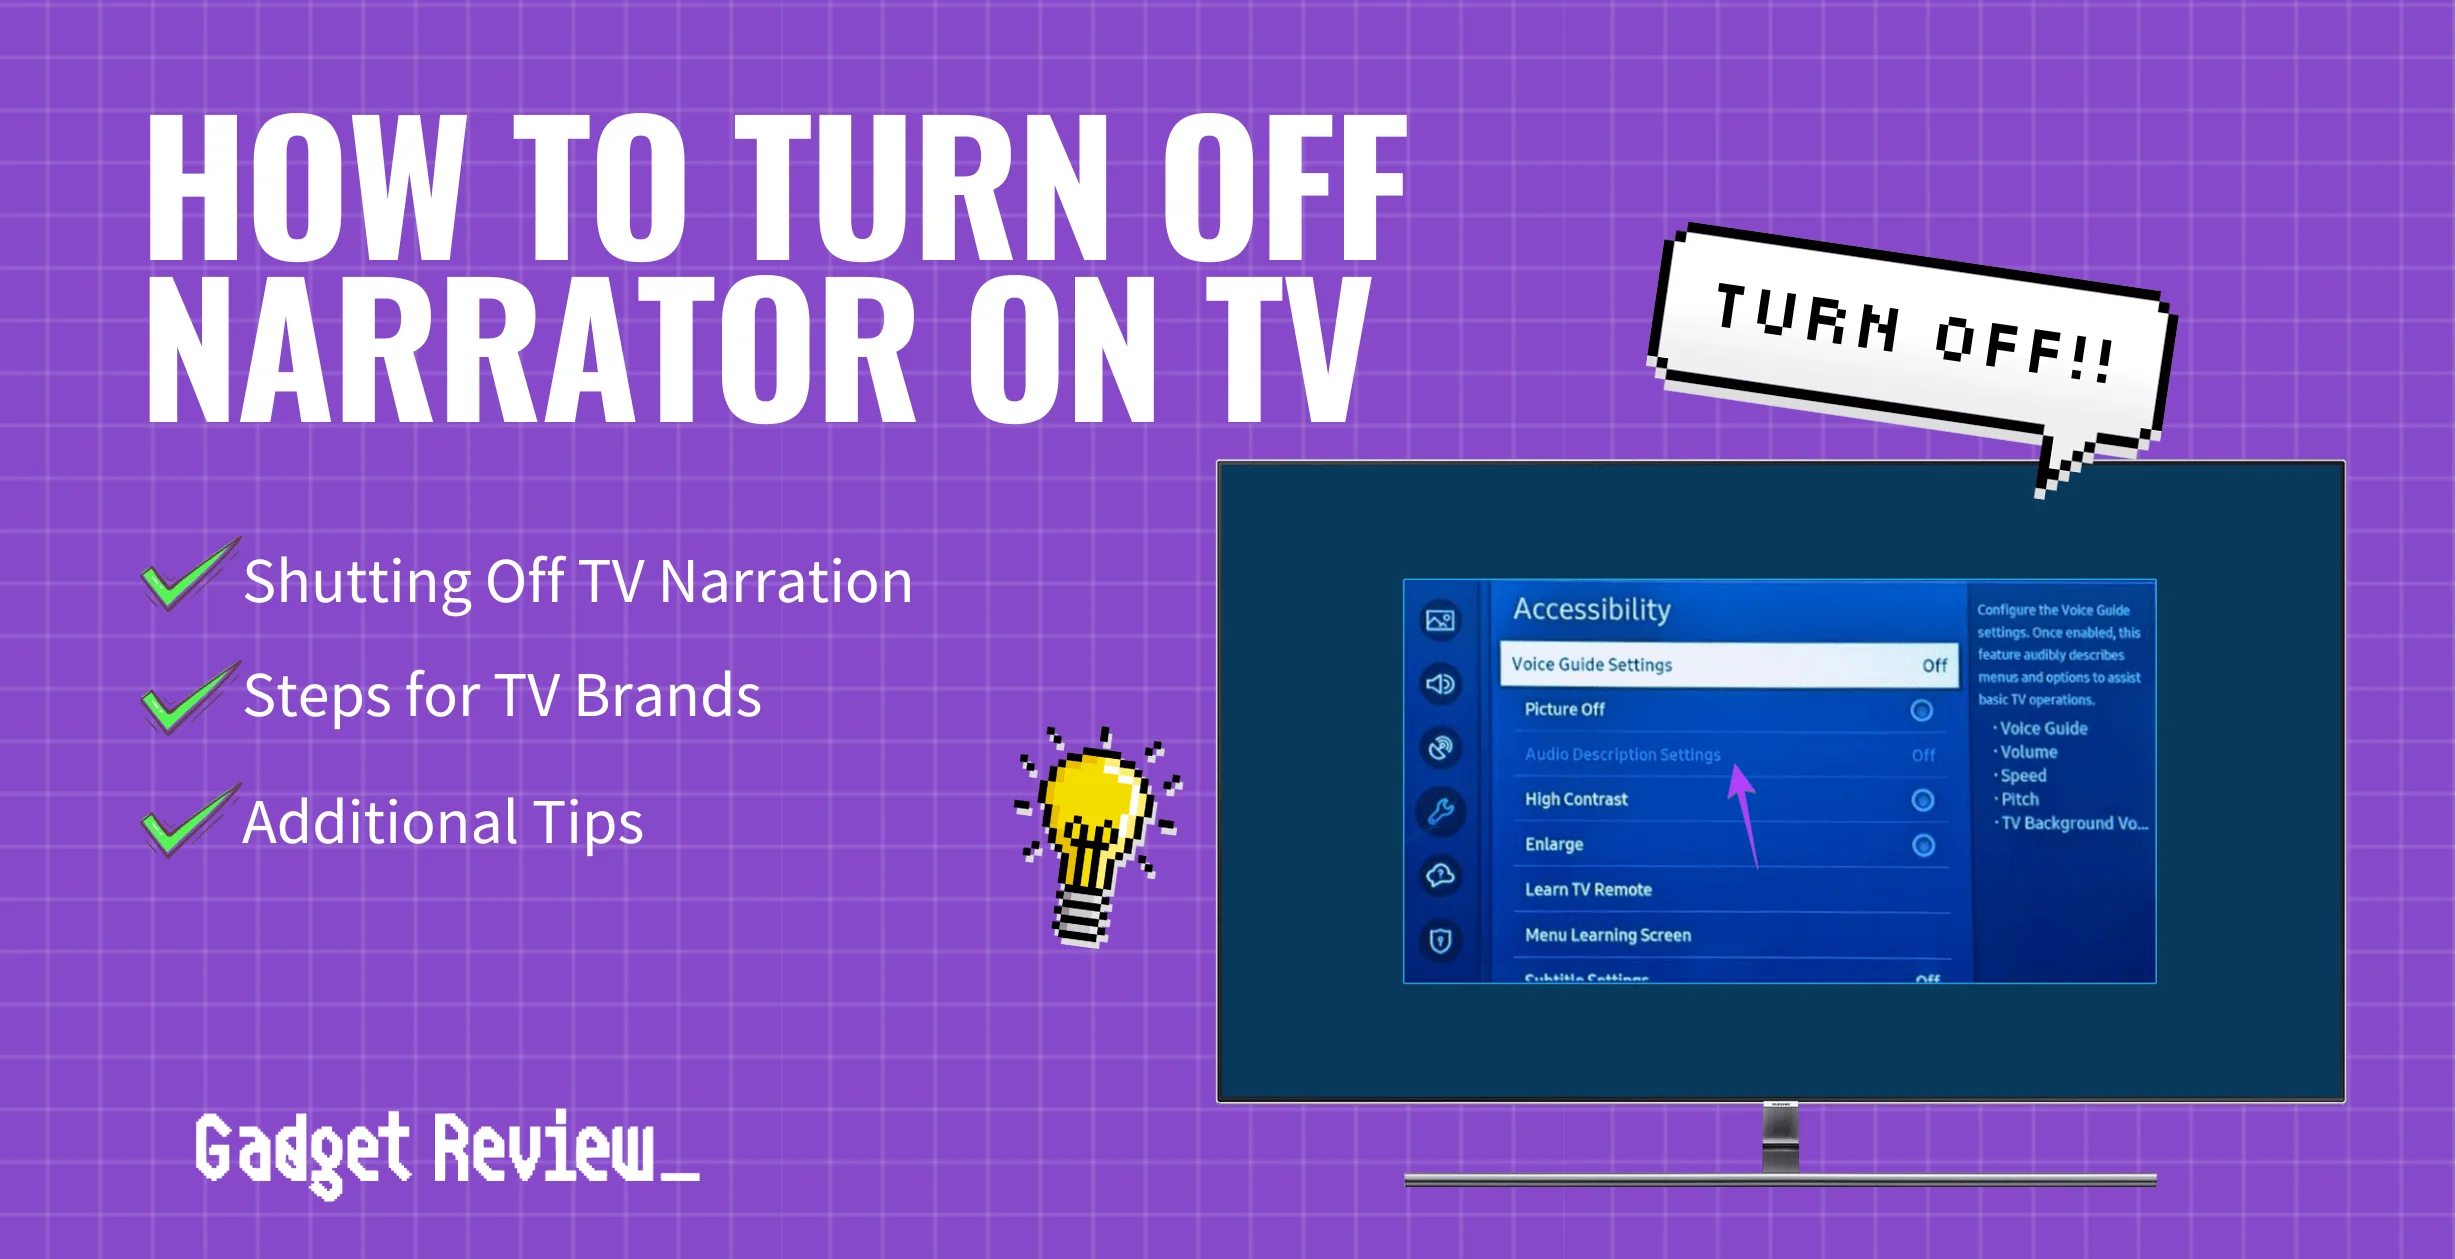 How to Turn Off the Narrator on a TV